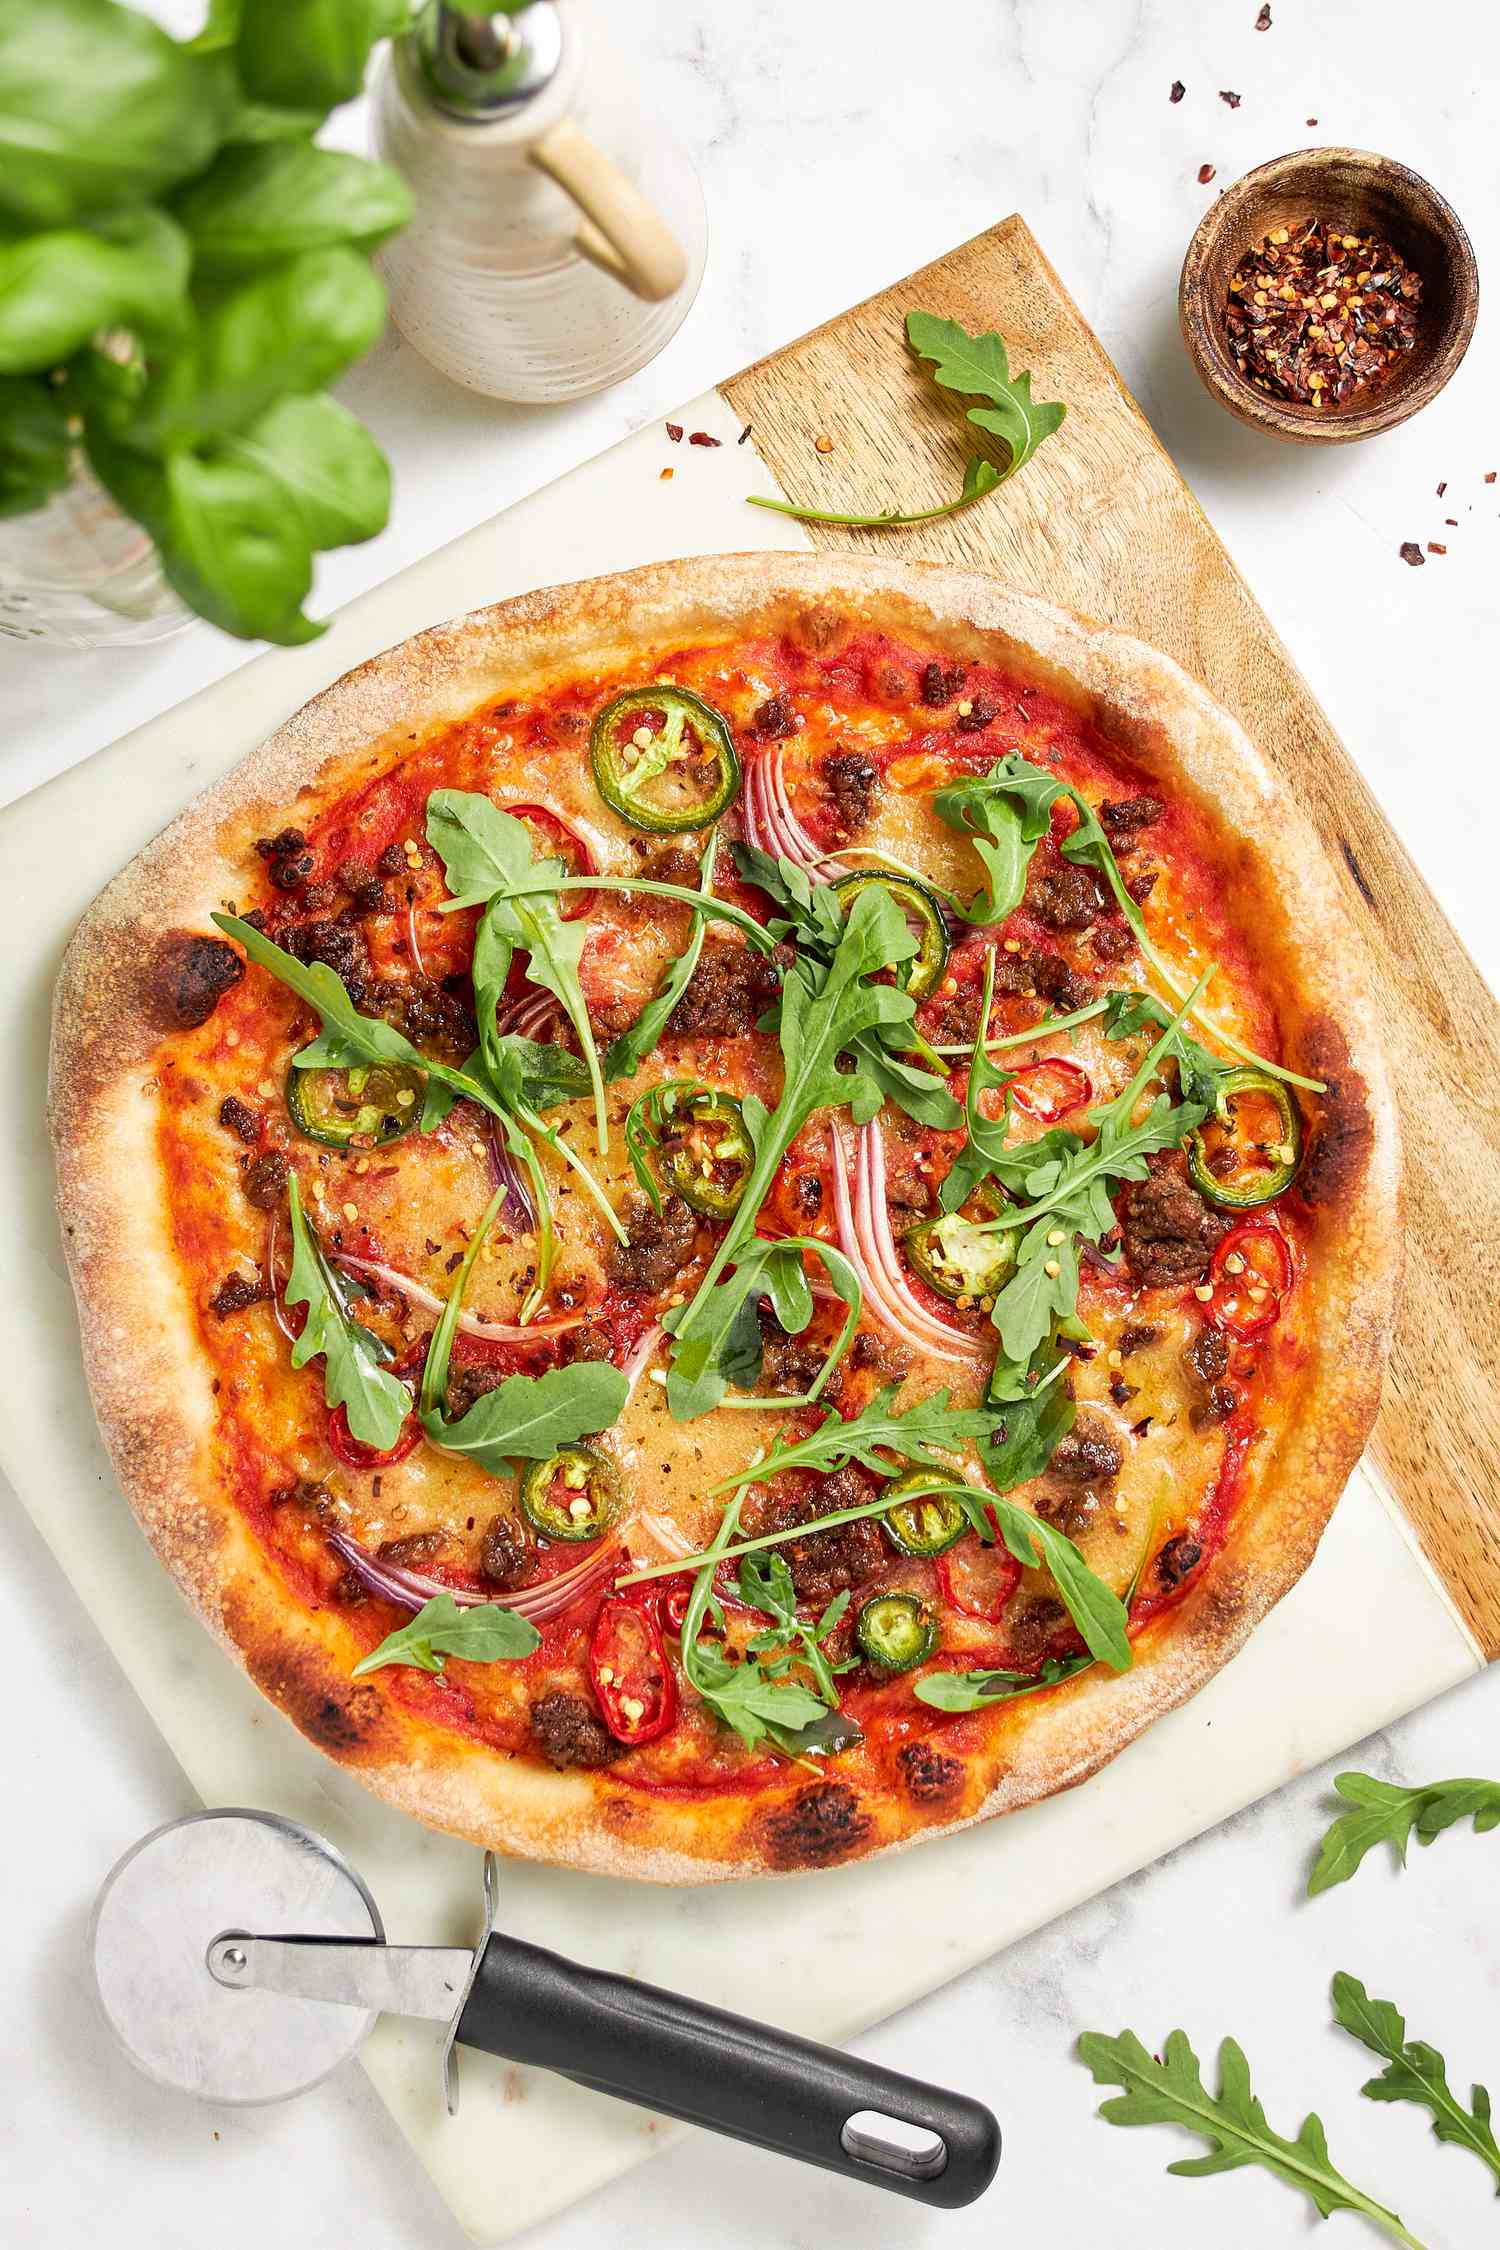 Vegan Pizza Topped With Jalapeno and Red Onion Slices, Arugula, and Chili Flakes on a Cutting Board With a Pizza Cutter, and in the Surroundings, a Glass With Fresh Basil, a Oil Dispenser, a Bowl of Chili Flakes, and a Few Rogue Arugula on the Counter